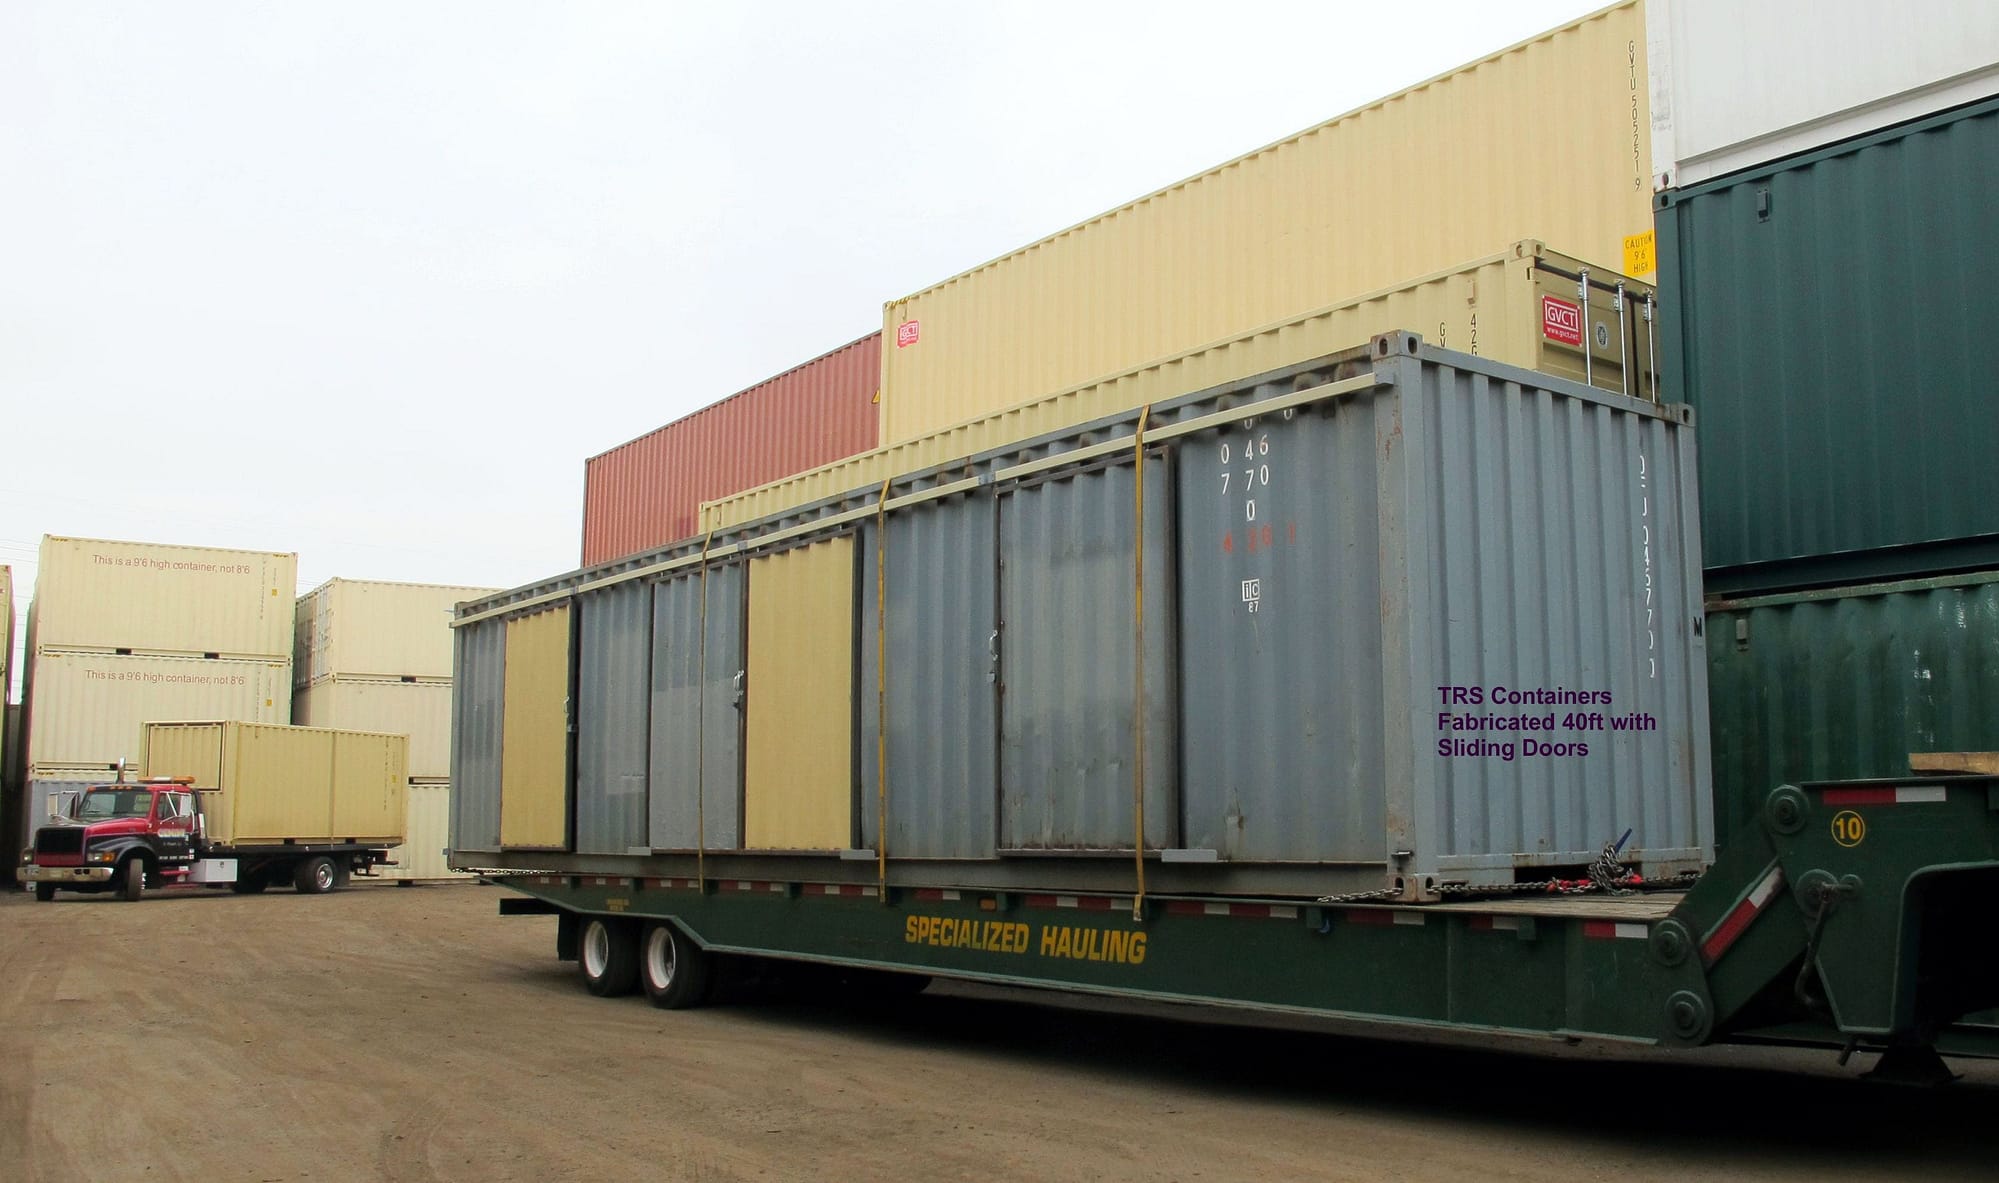 TRS Containers modifies 20ft, 40ft and 45ft long steel containers into alternative containr structures